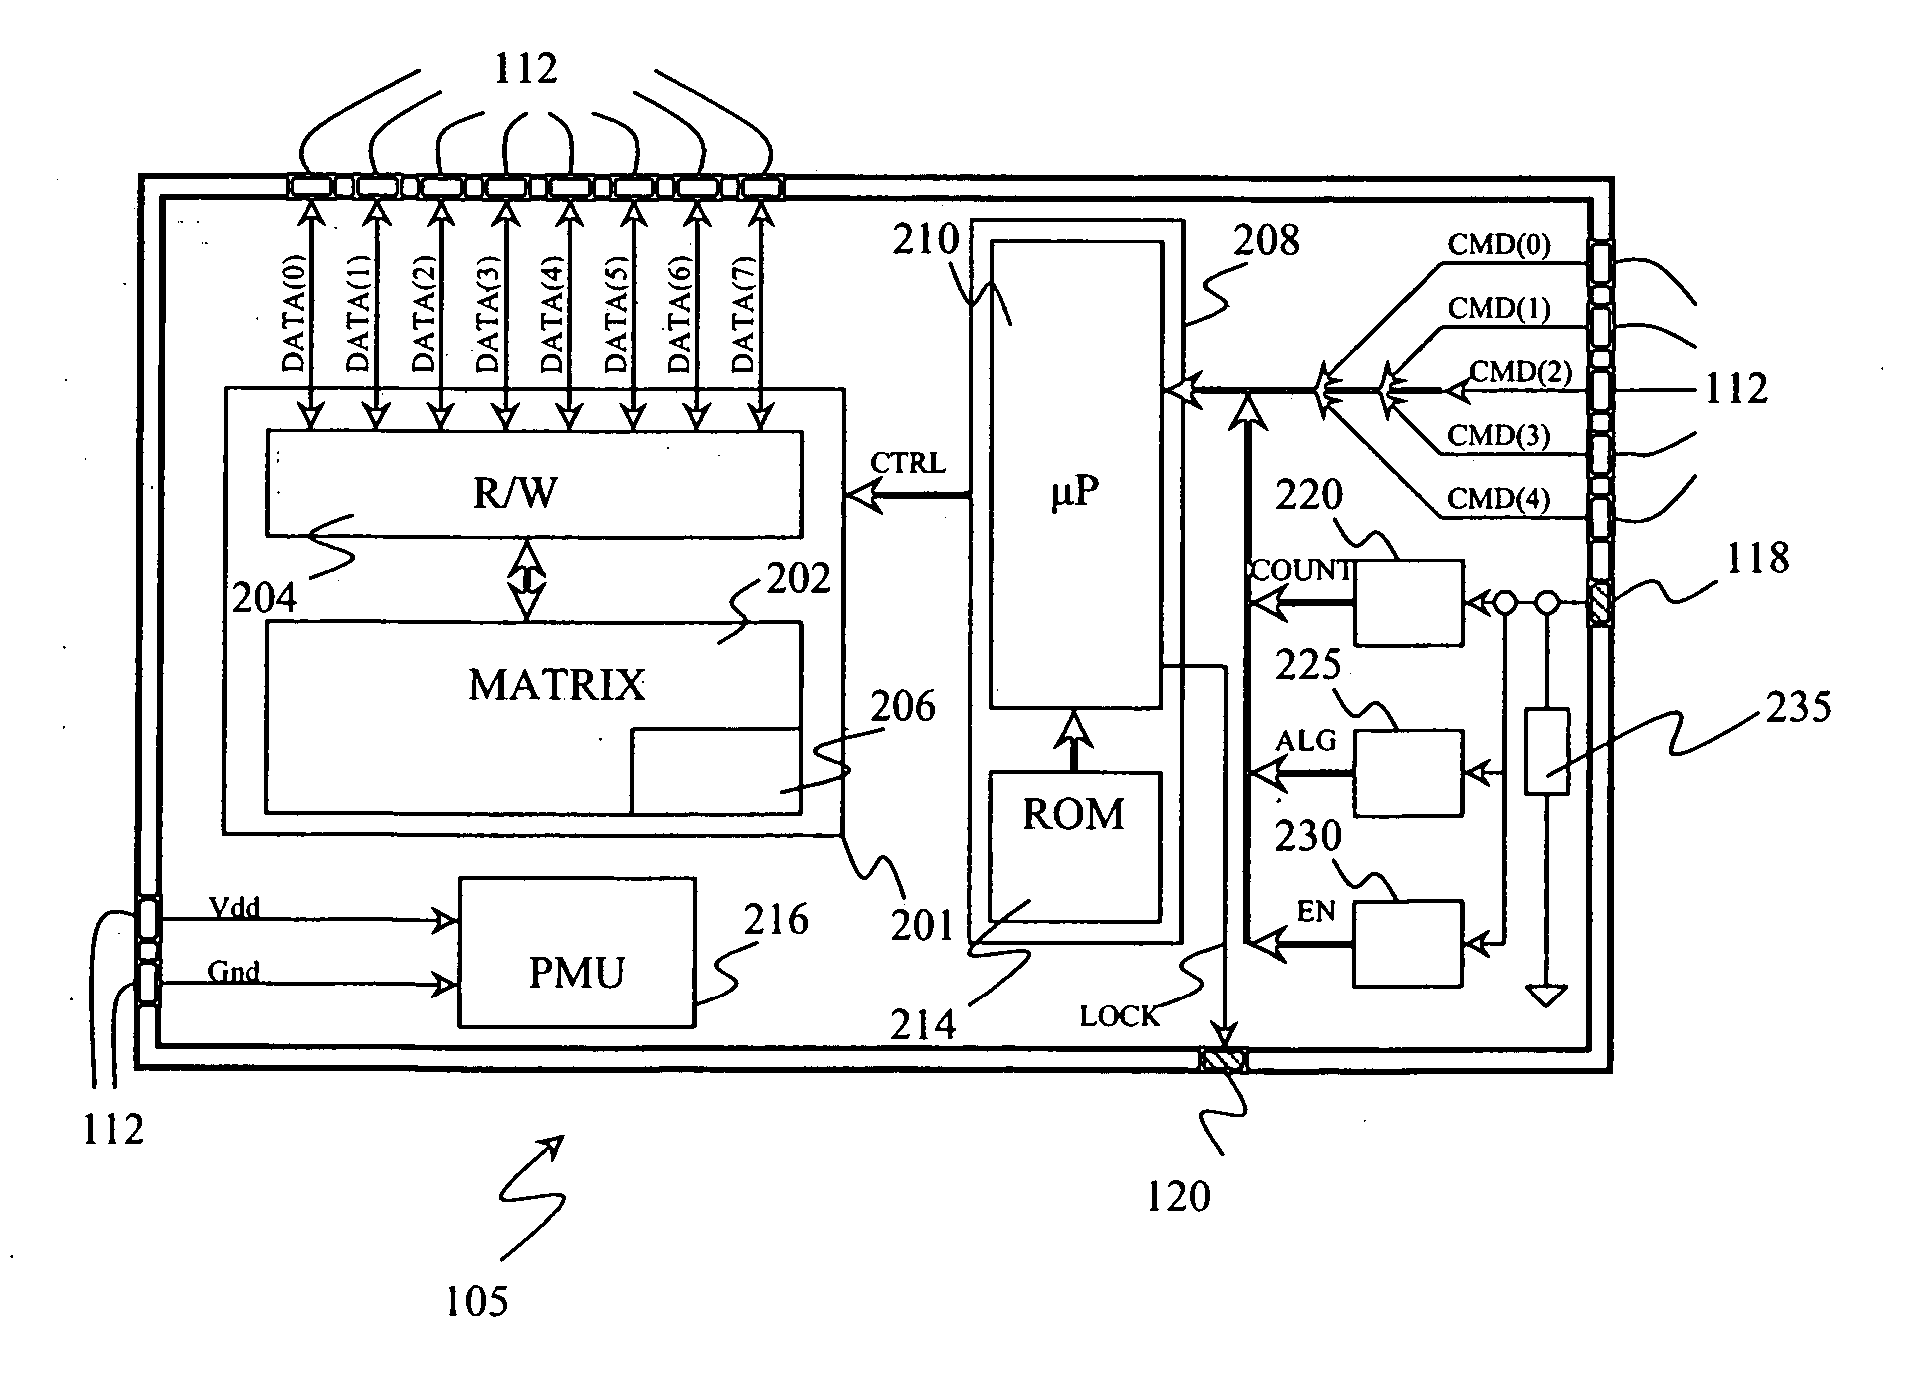 Non-volatile memory device supporting high-parallelism test at wafer level